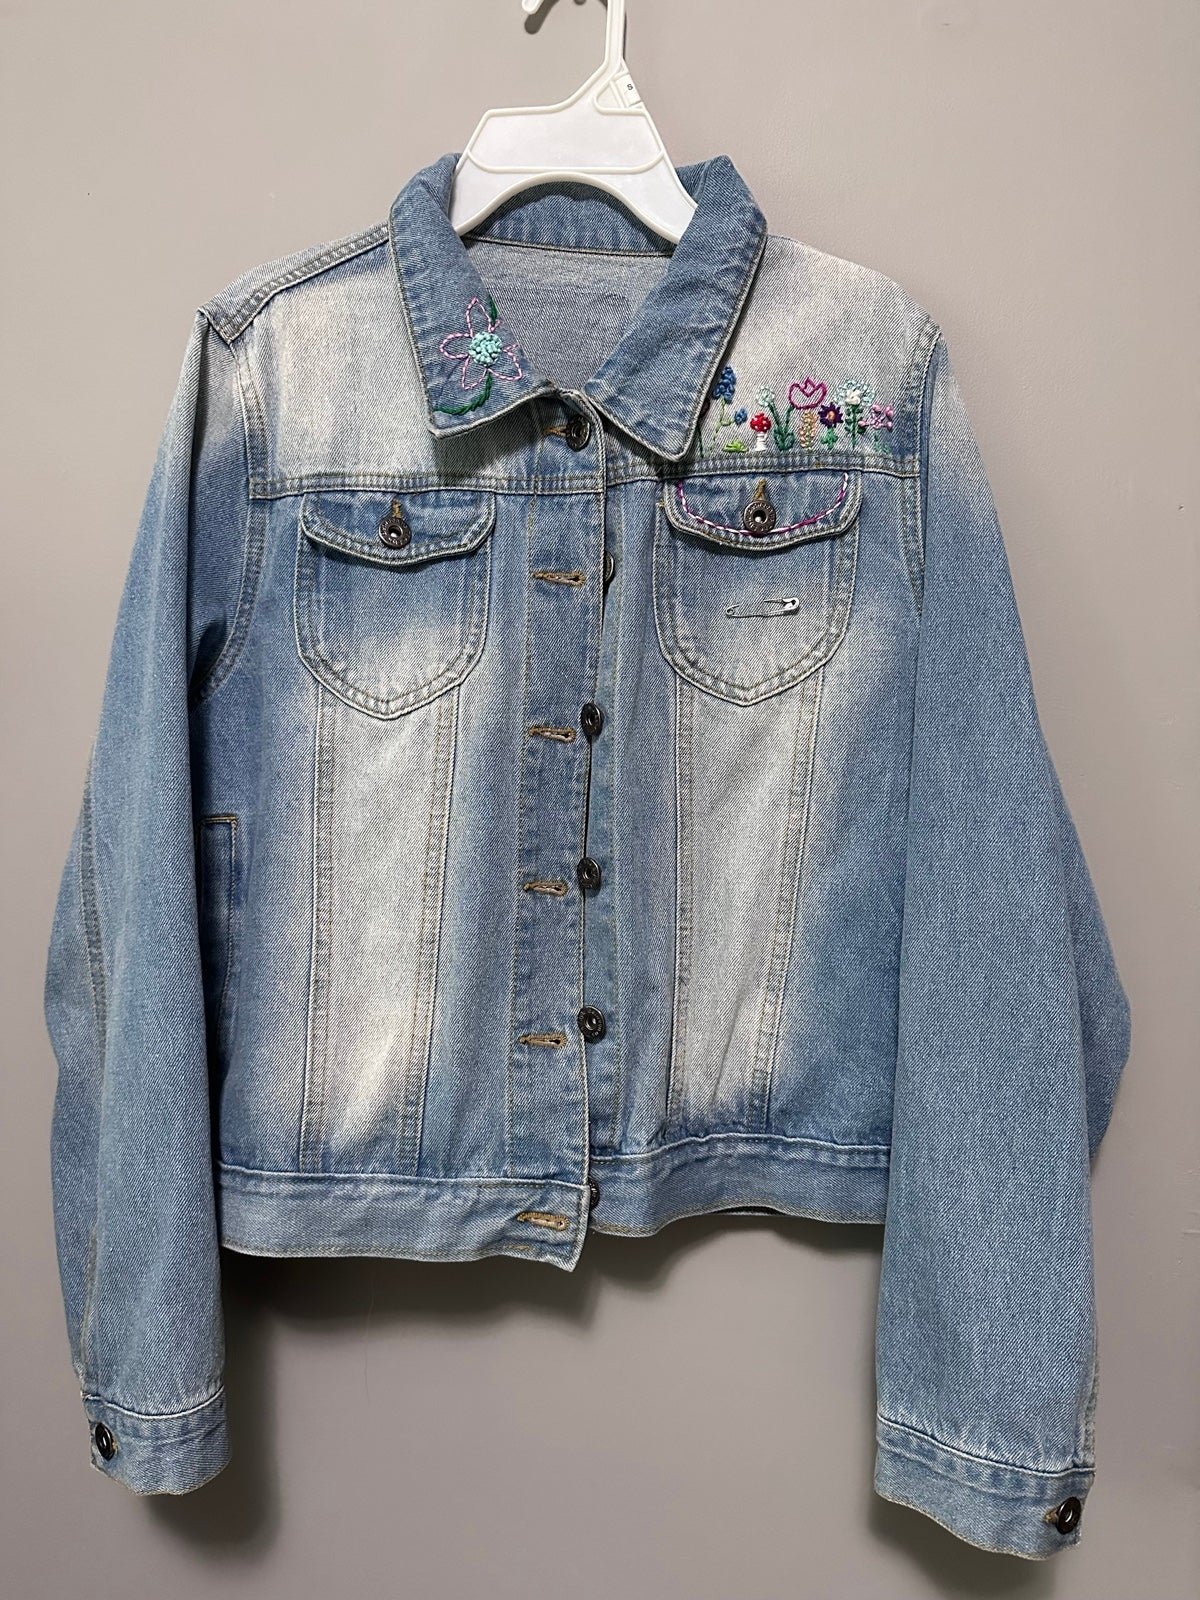 Exclusive embroidered jean jacket GmvAT9lqz Novel 